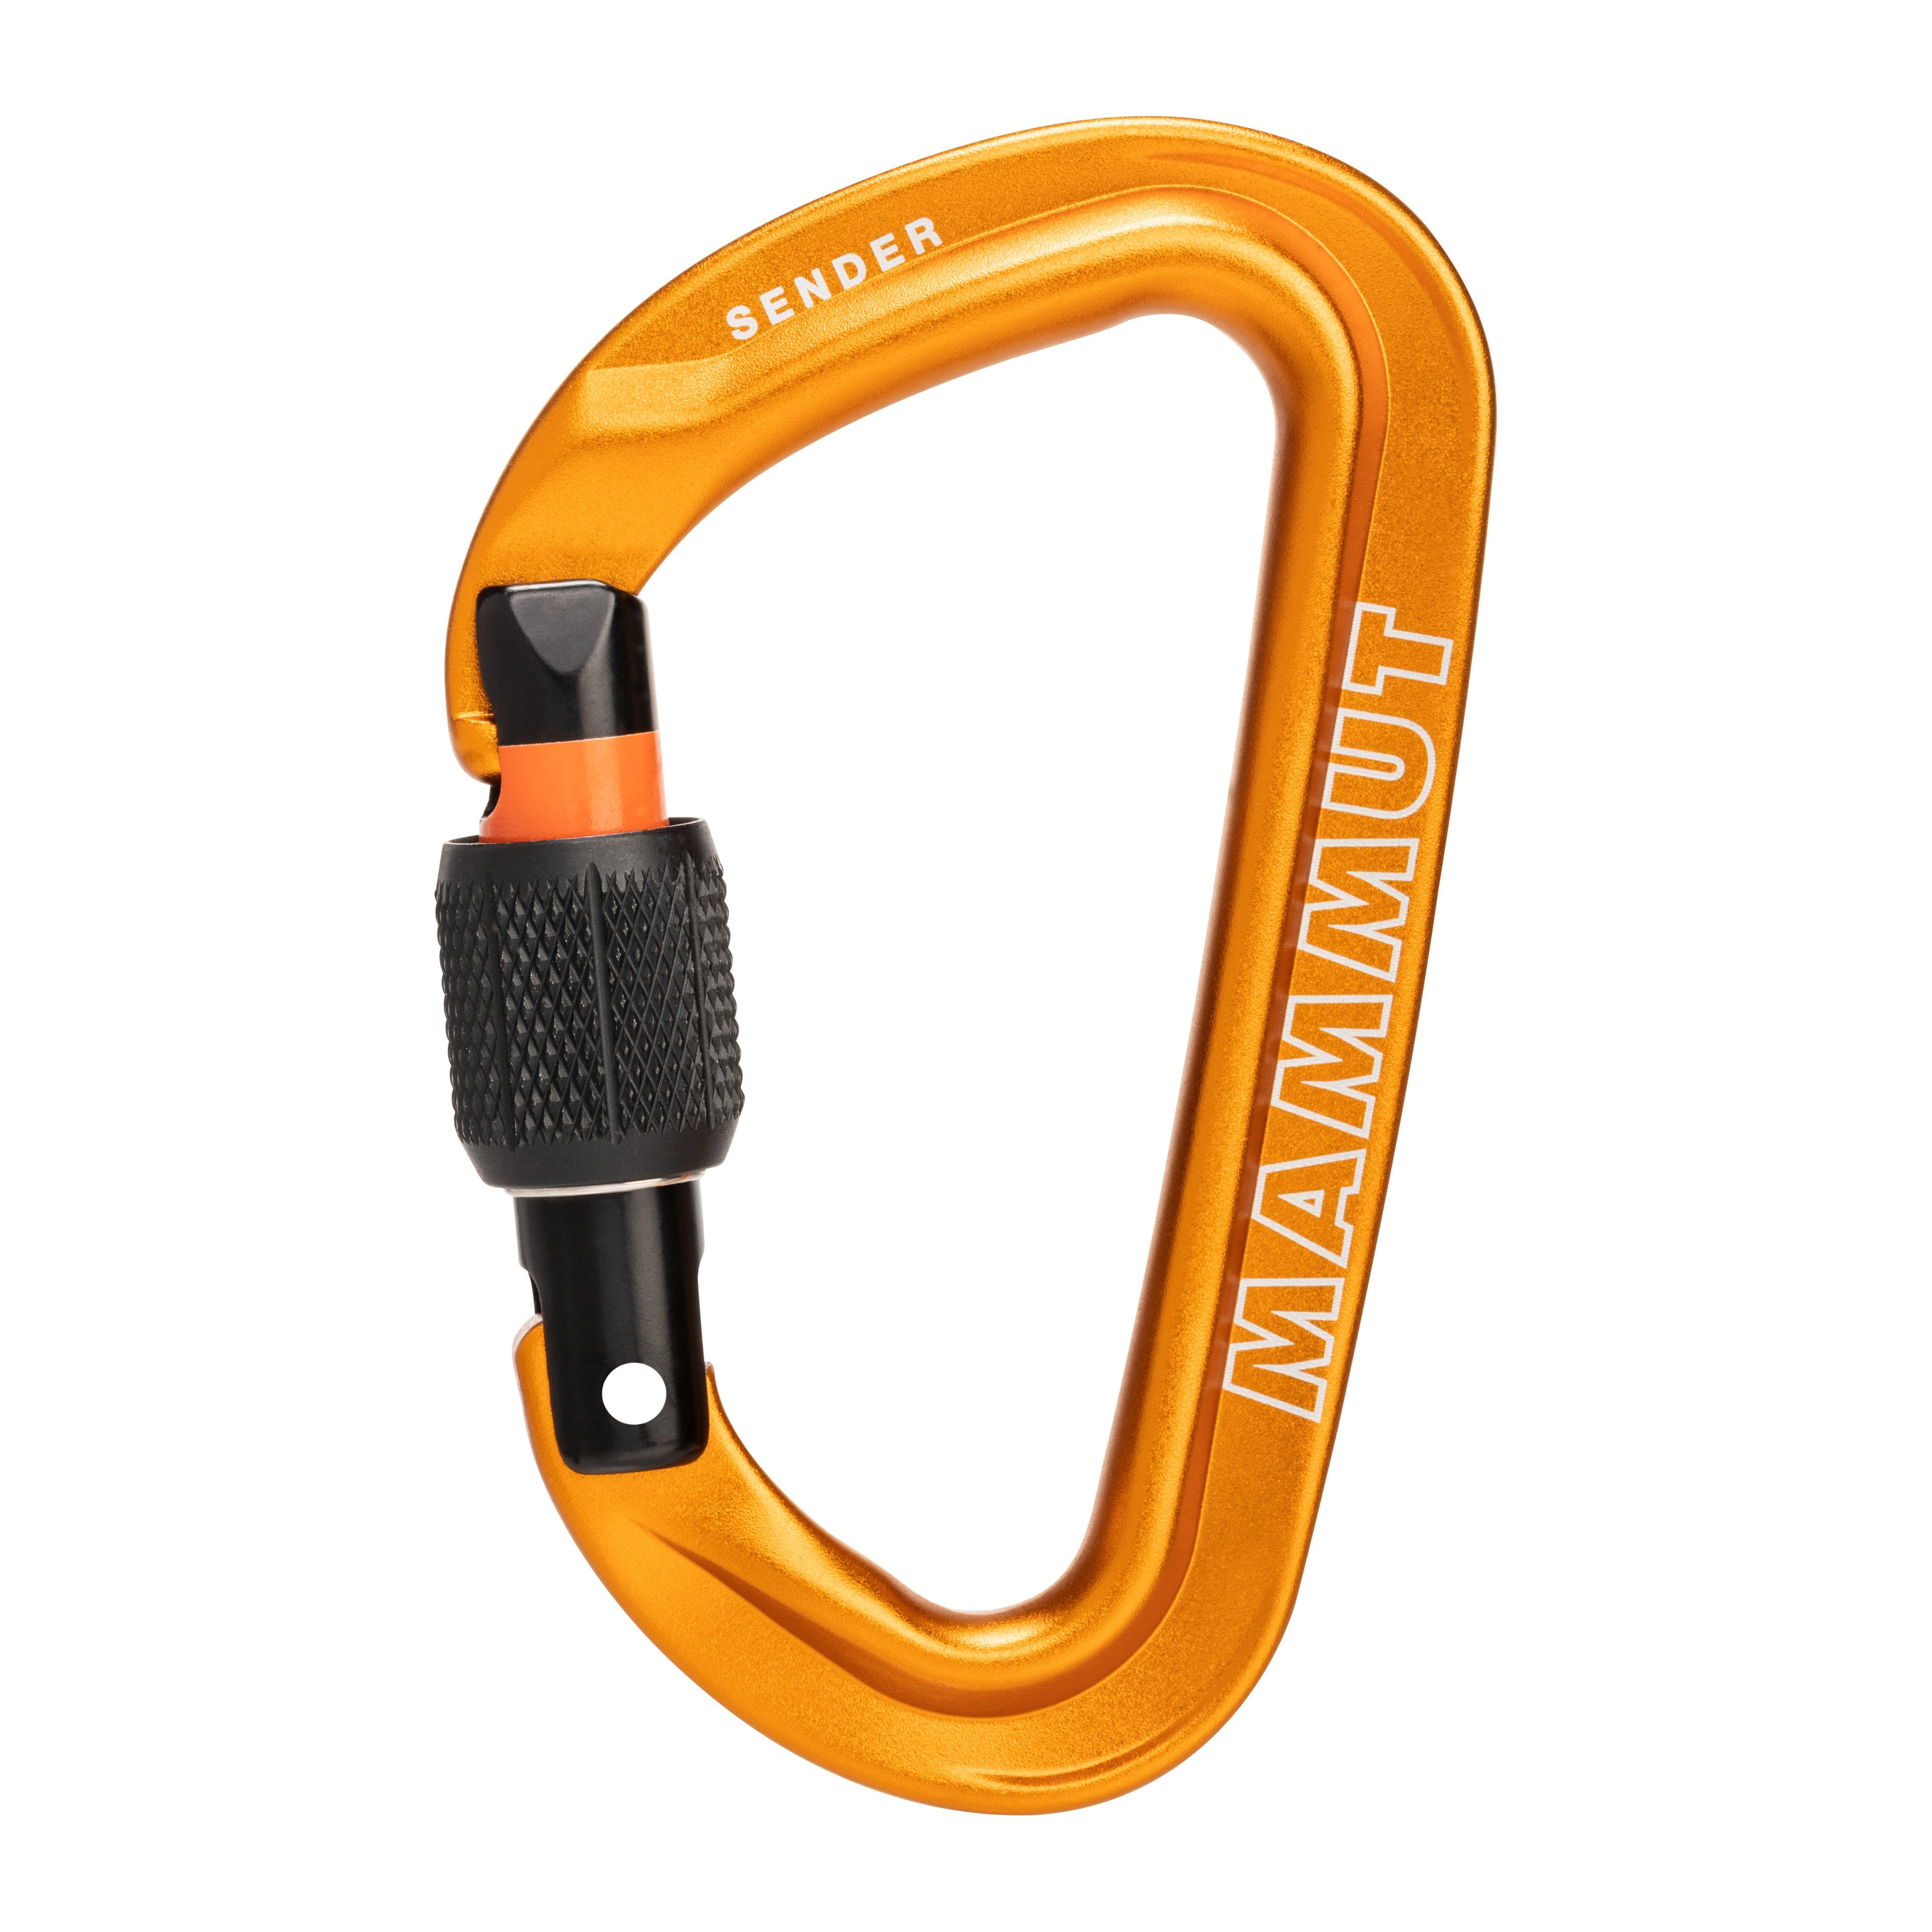 Sender Screwgate Carabiner - gold, one size product image